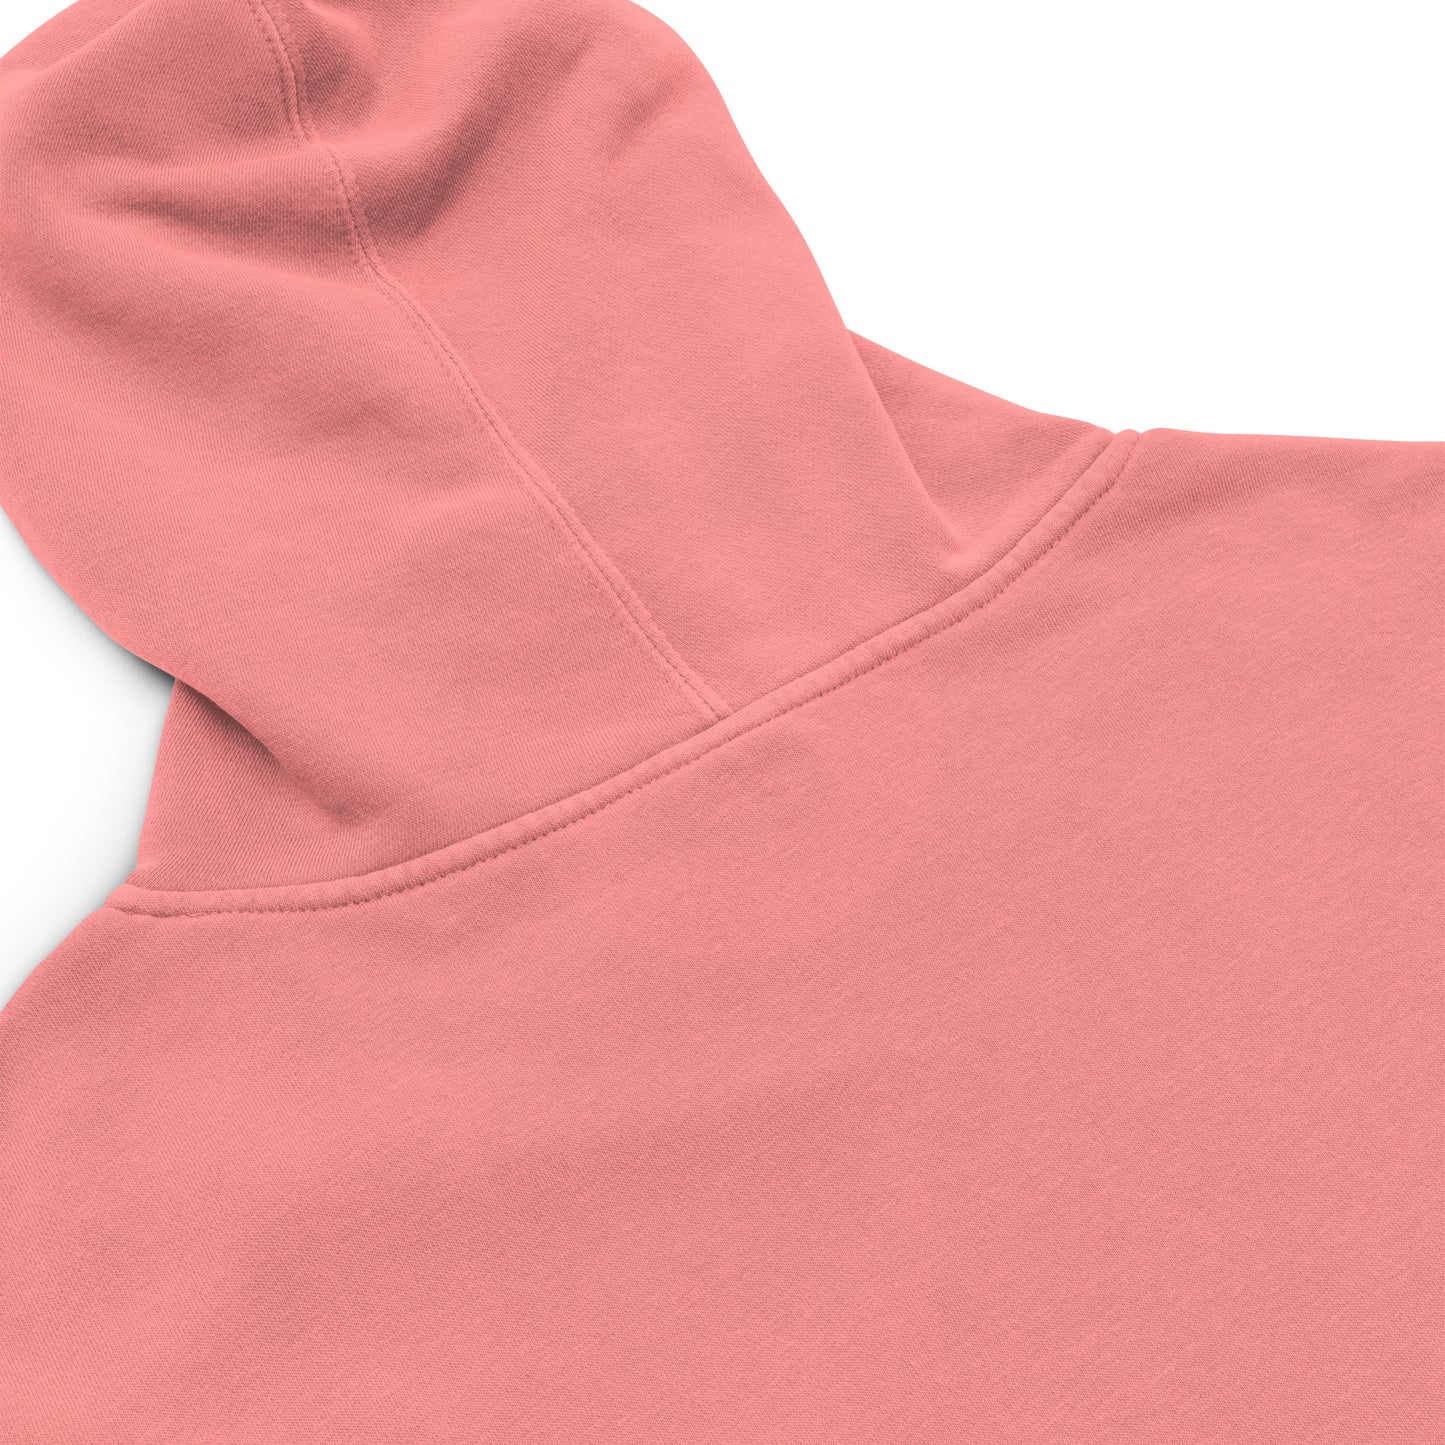 FOH Unisex pigment-dyed hoodie [F.1]